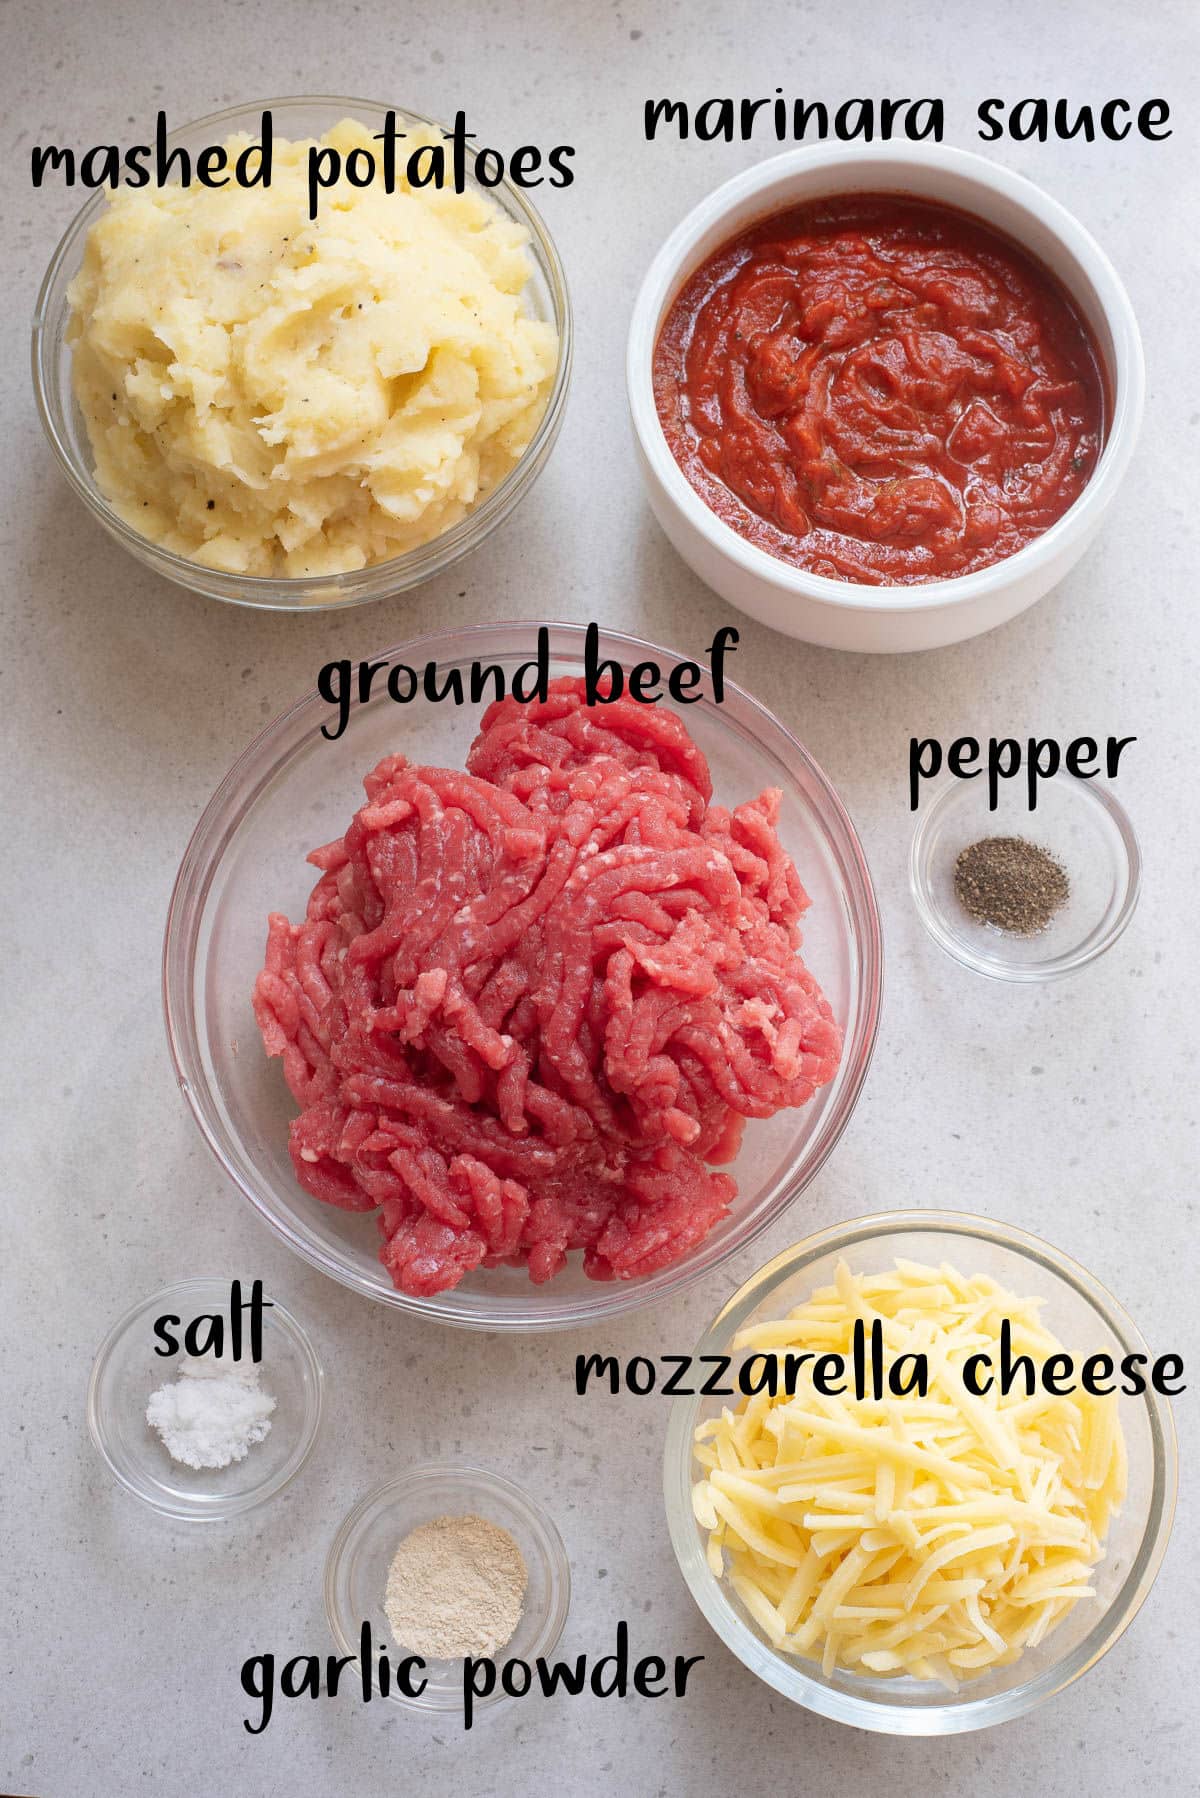 Ingredients to make a meatball and potato casserole.